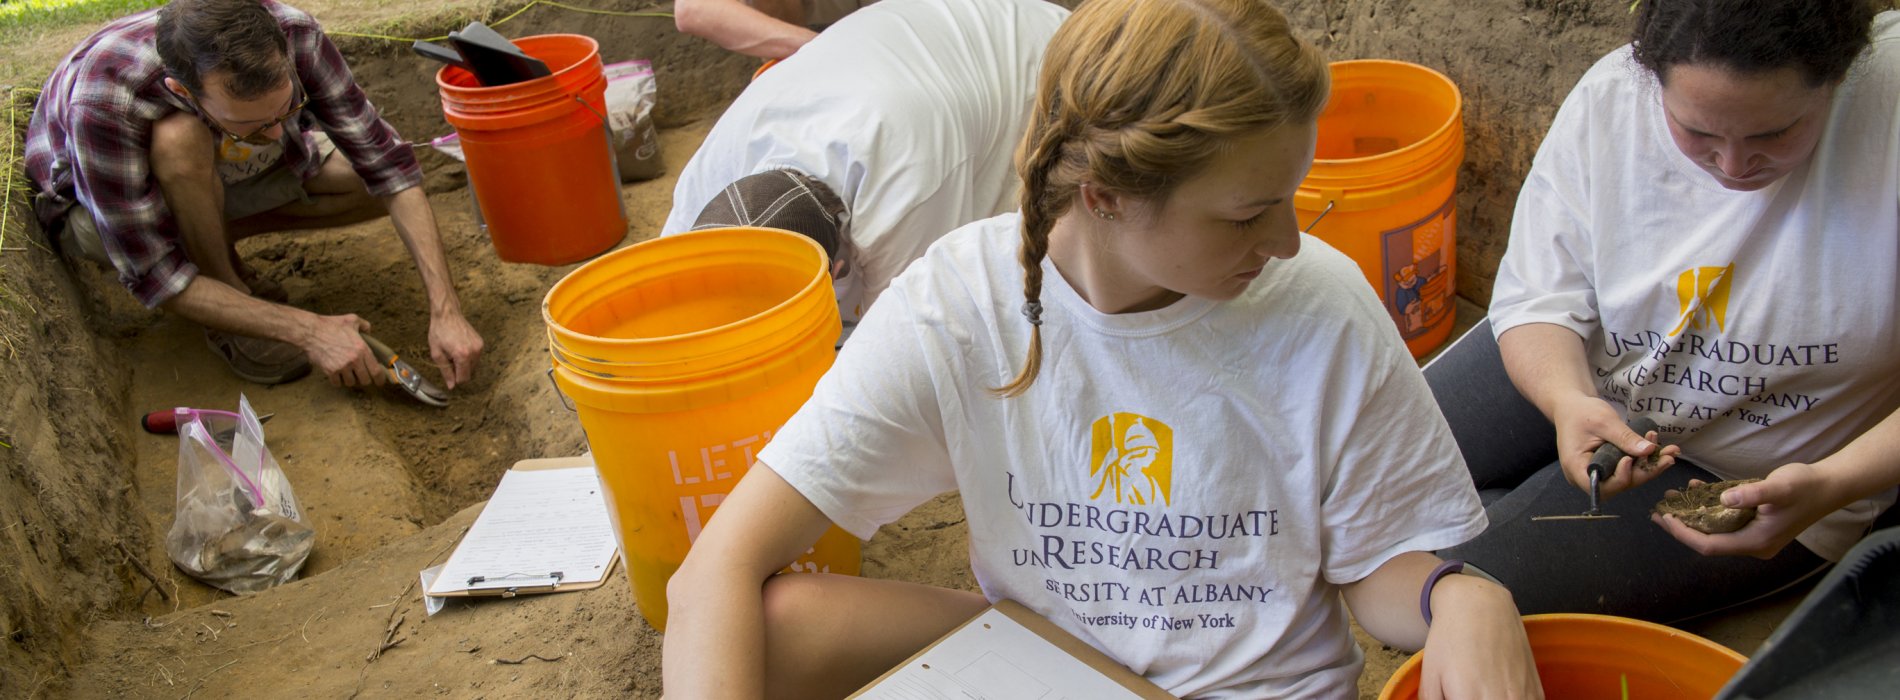 Five students wearing Undergraduate Research t-shirts excavate artifacts at the archaeology dig